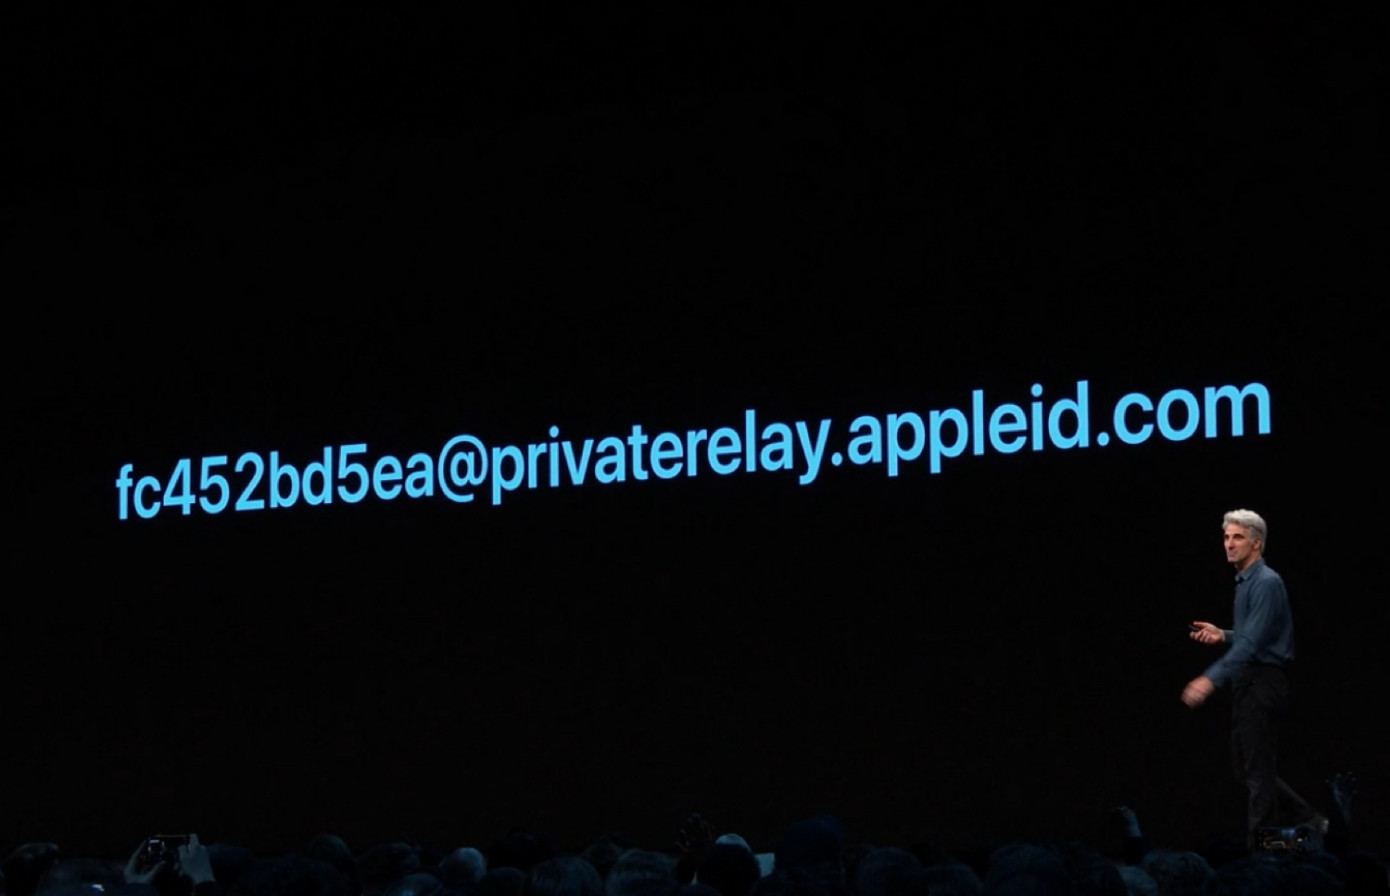 Photo of what Apple relay address